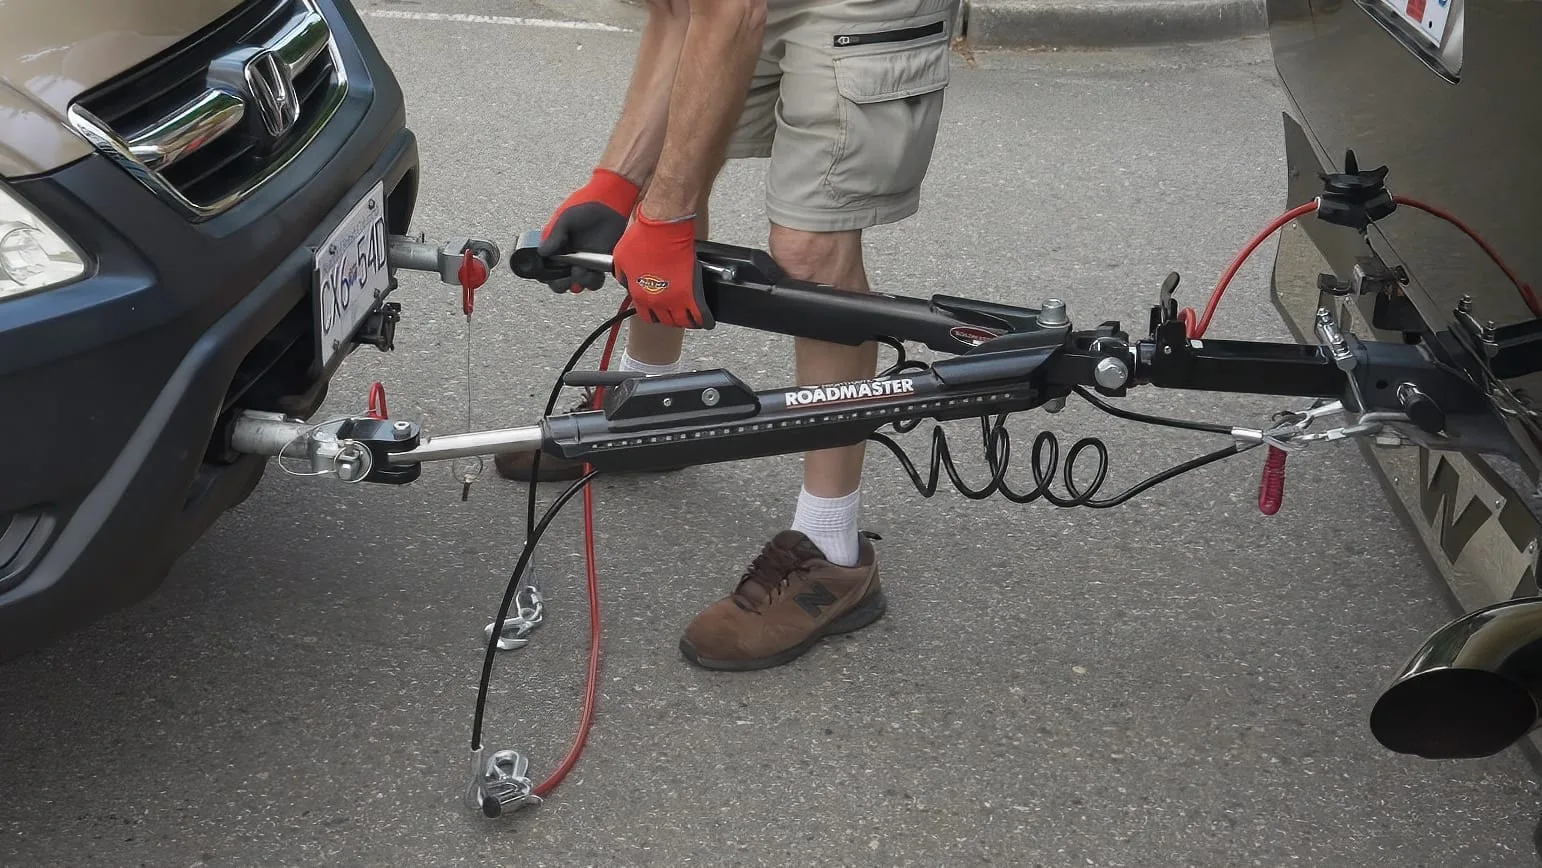 Tow bars have arms that attach to connections on the vehicles they tow.